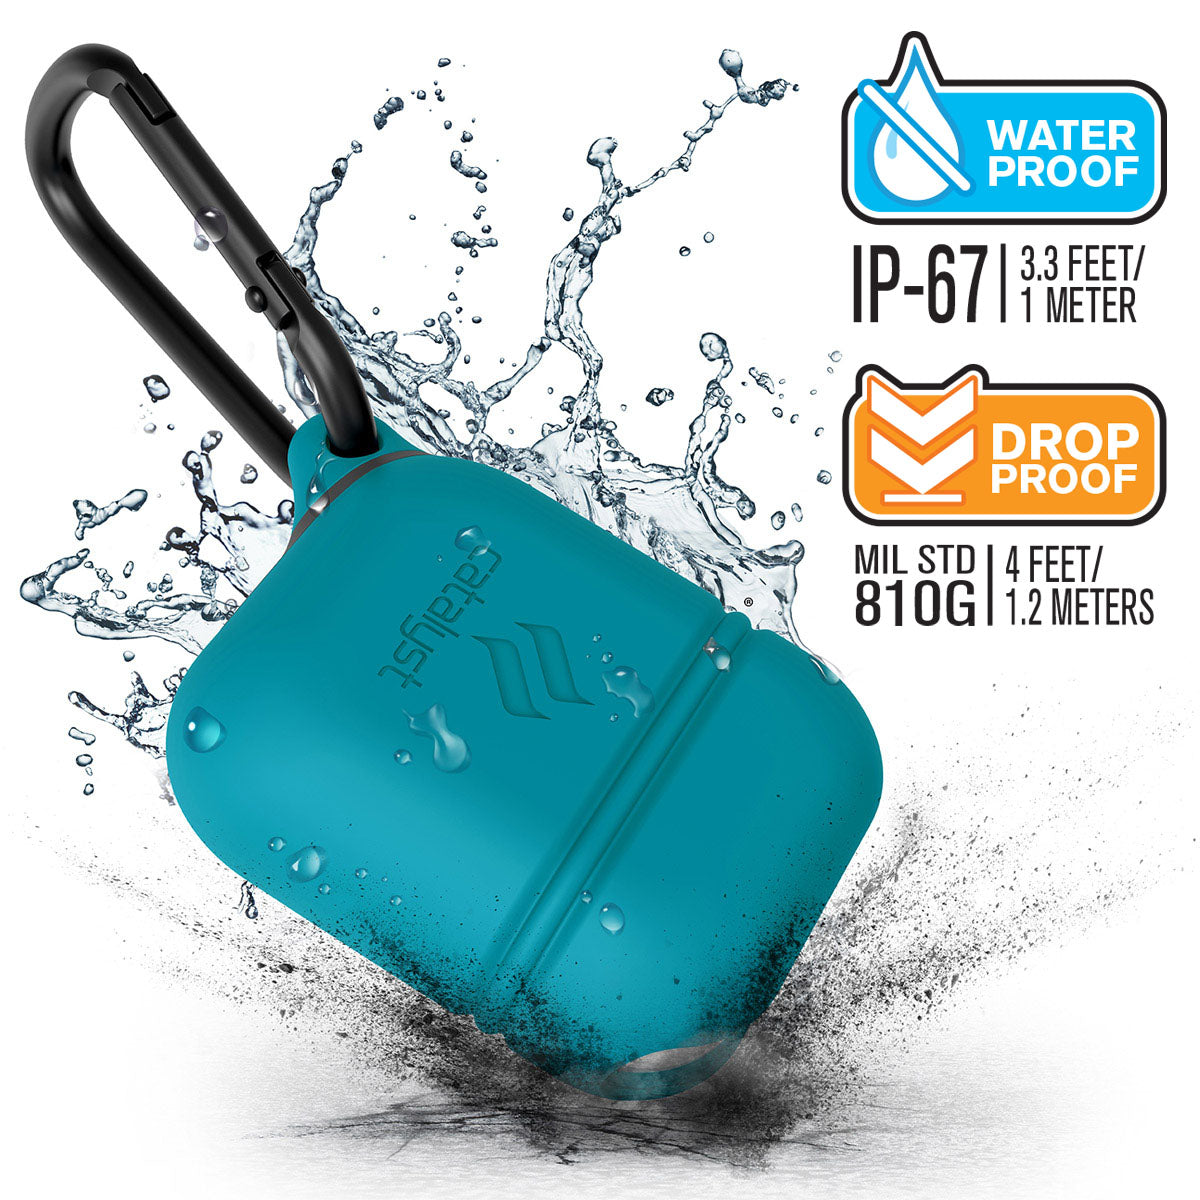 CATAPDTEAL | Catalyst airpods gen2/1 waterproof case + carabiner showing the case drop proof and water proof features with attached carabiner in glacier blue text reads water proof IP-67 3.3 FEET/1 METER DROP PROOF MIL STD 810G 1.2 METERS